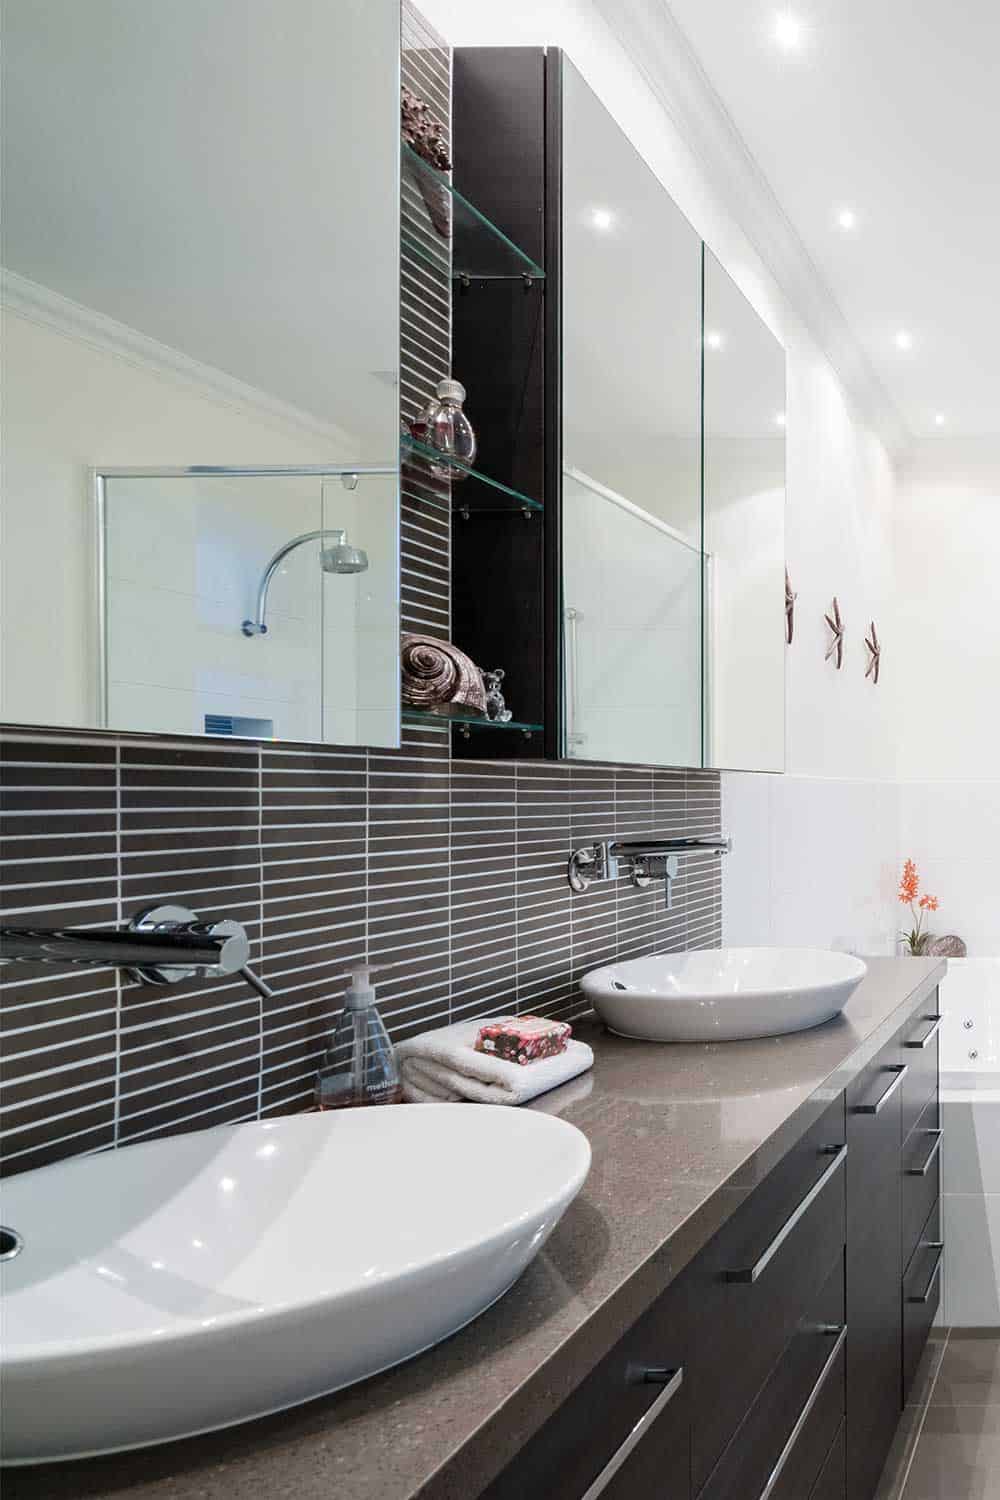 How Much Do Bathroom Remodeling Services Cost?